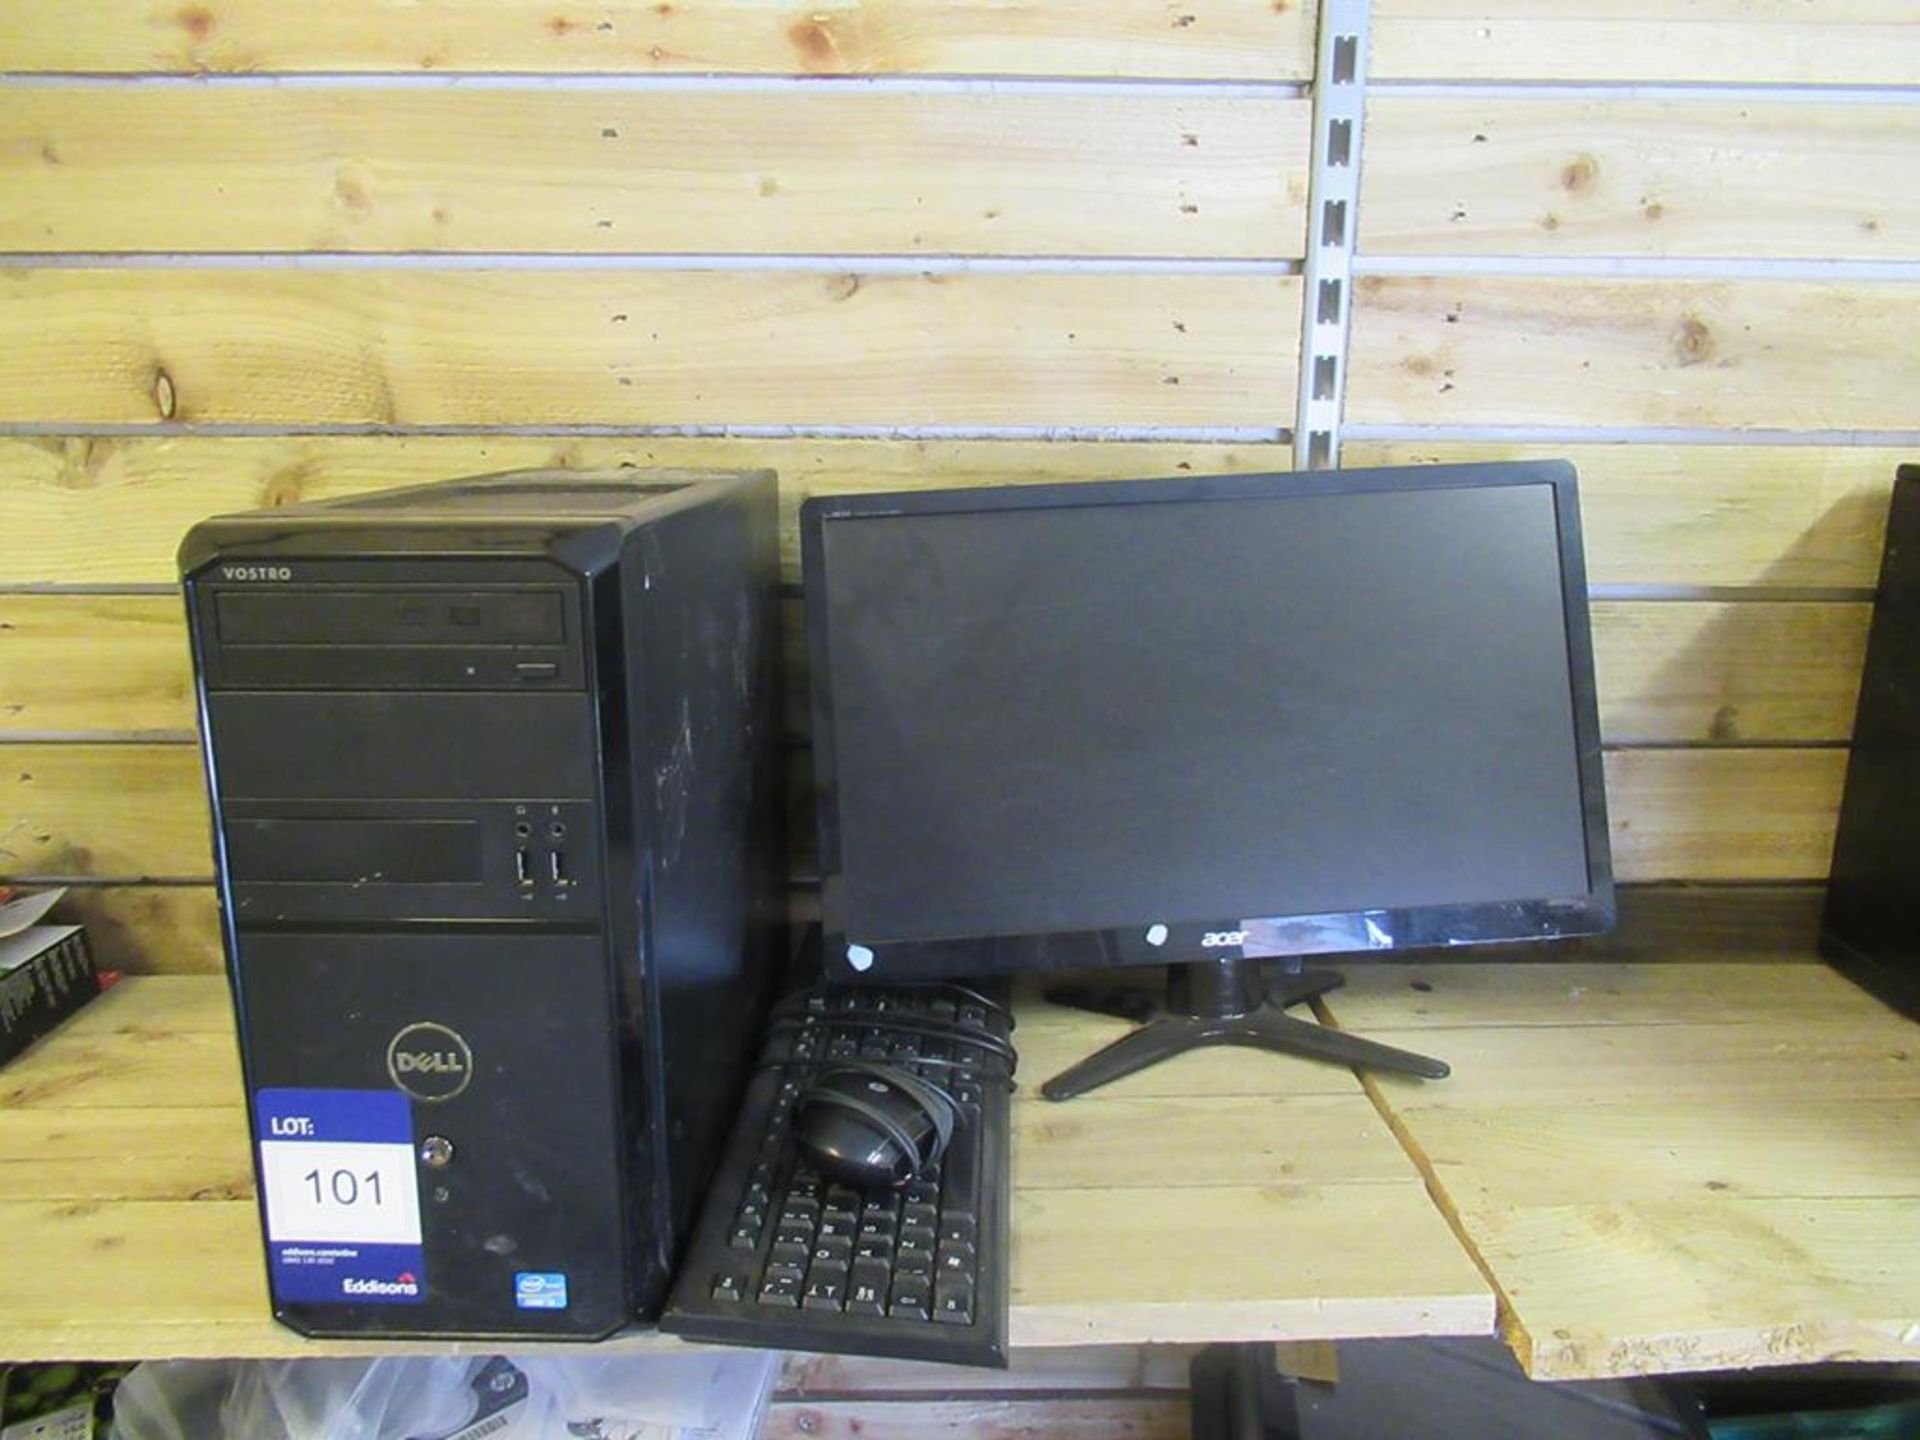 Dell PC Tower with Acer Monitor, Mouse and Keyboard